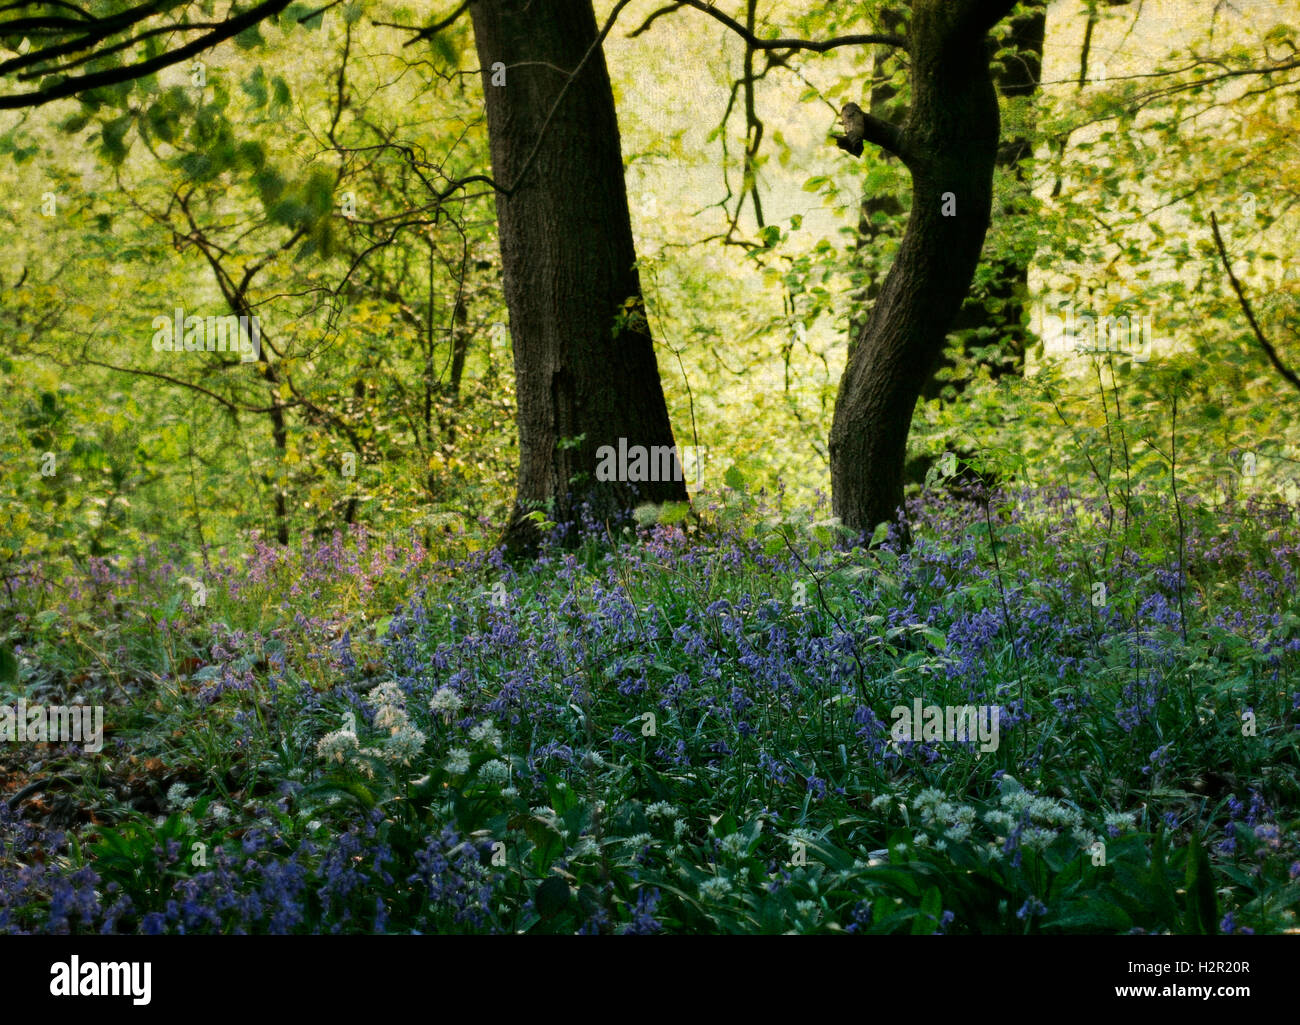 Bluebell Wood and Garlic flowers Stock Photo